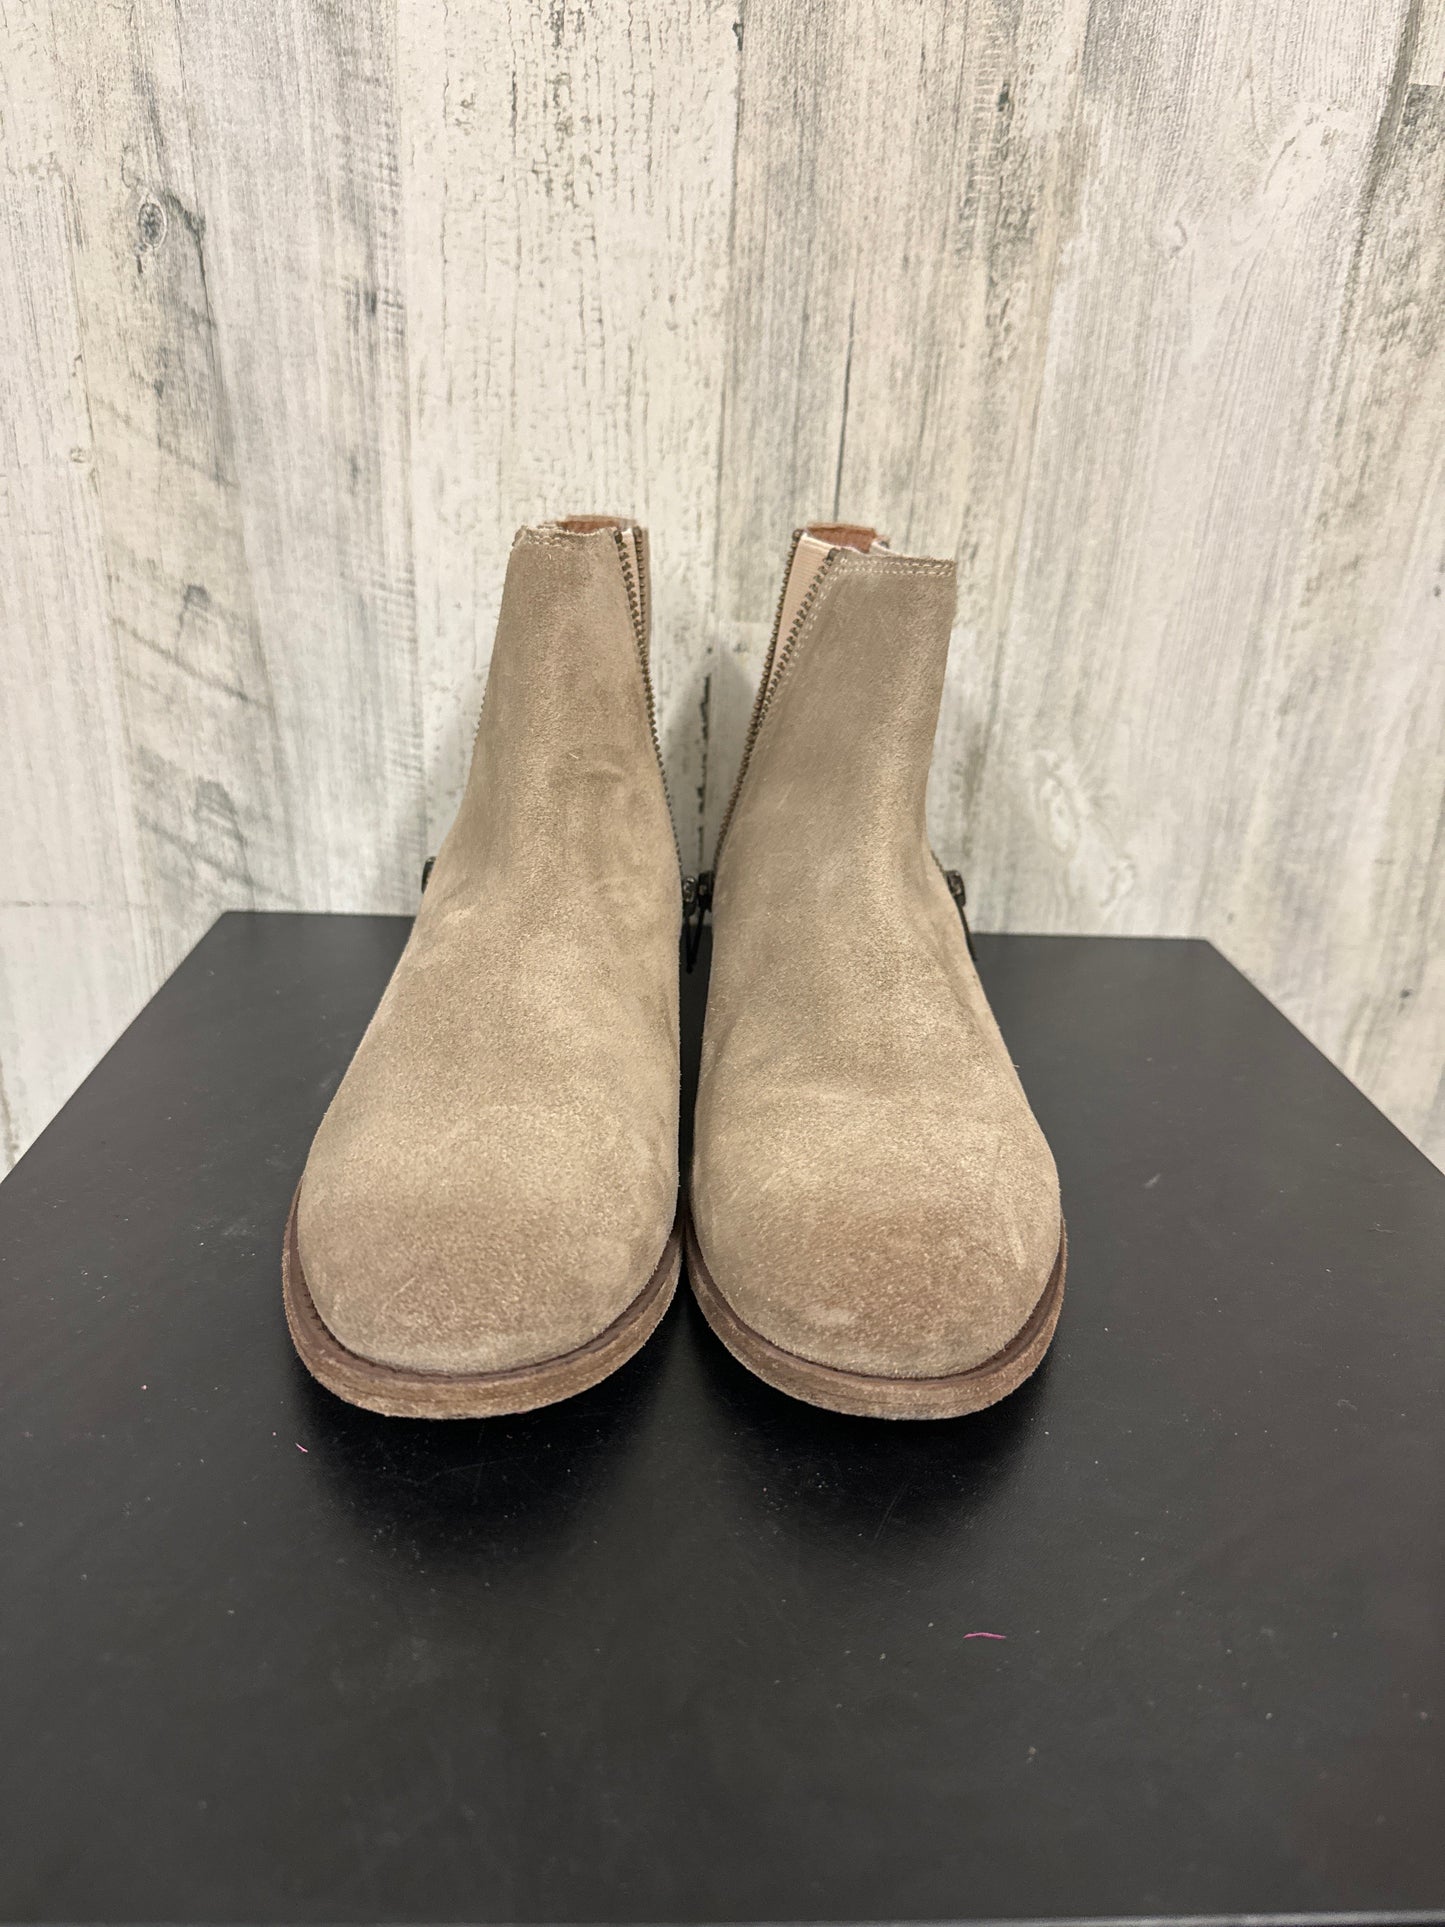 Boots Ankle Flats By Frye  Size: 8.5